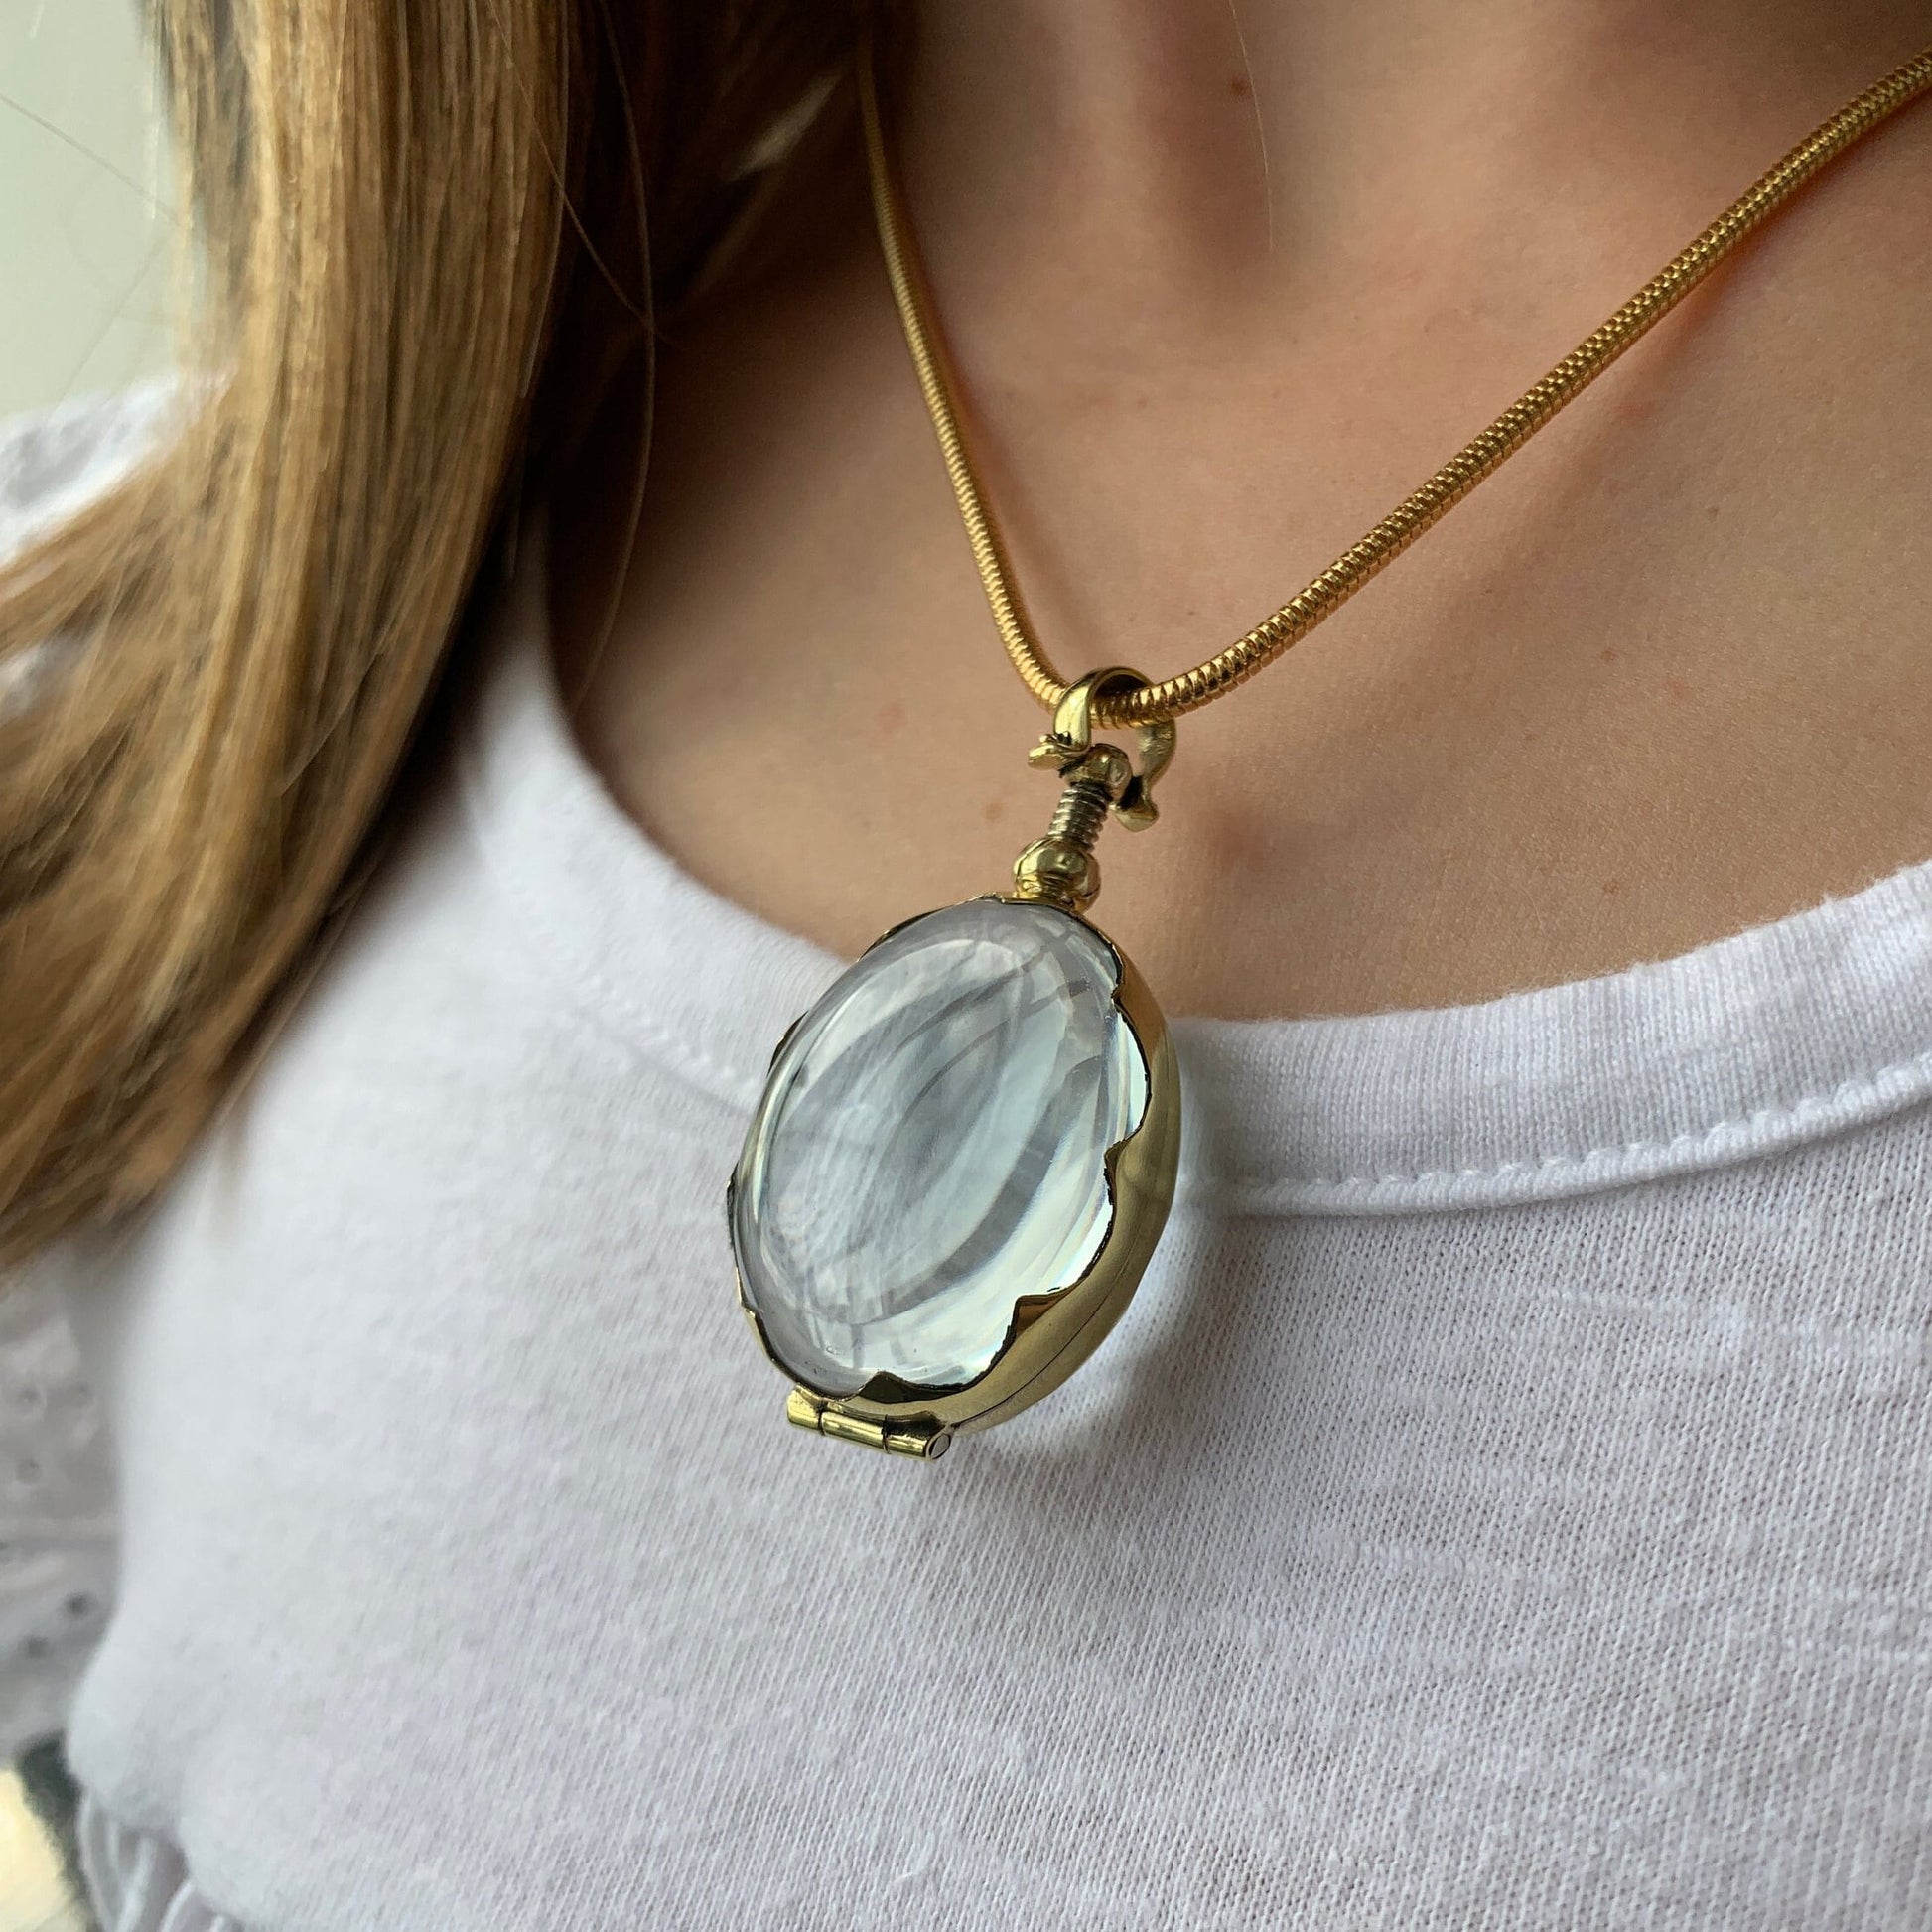 Glass Locket Necklace Gold Locket Necklace Miniature Photo Frame Gift For Unique Bereavement Gifts for a Friend Sympathy Keepsake Necklace